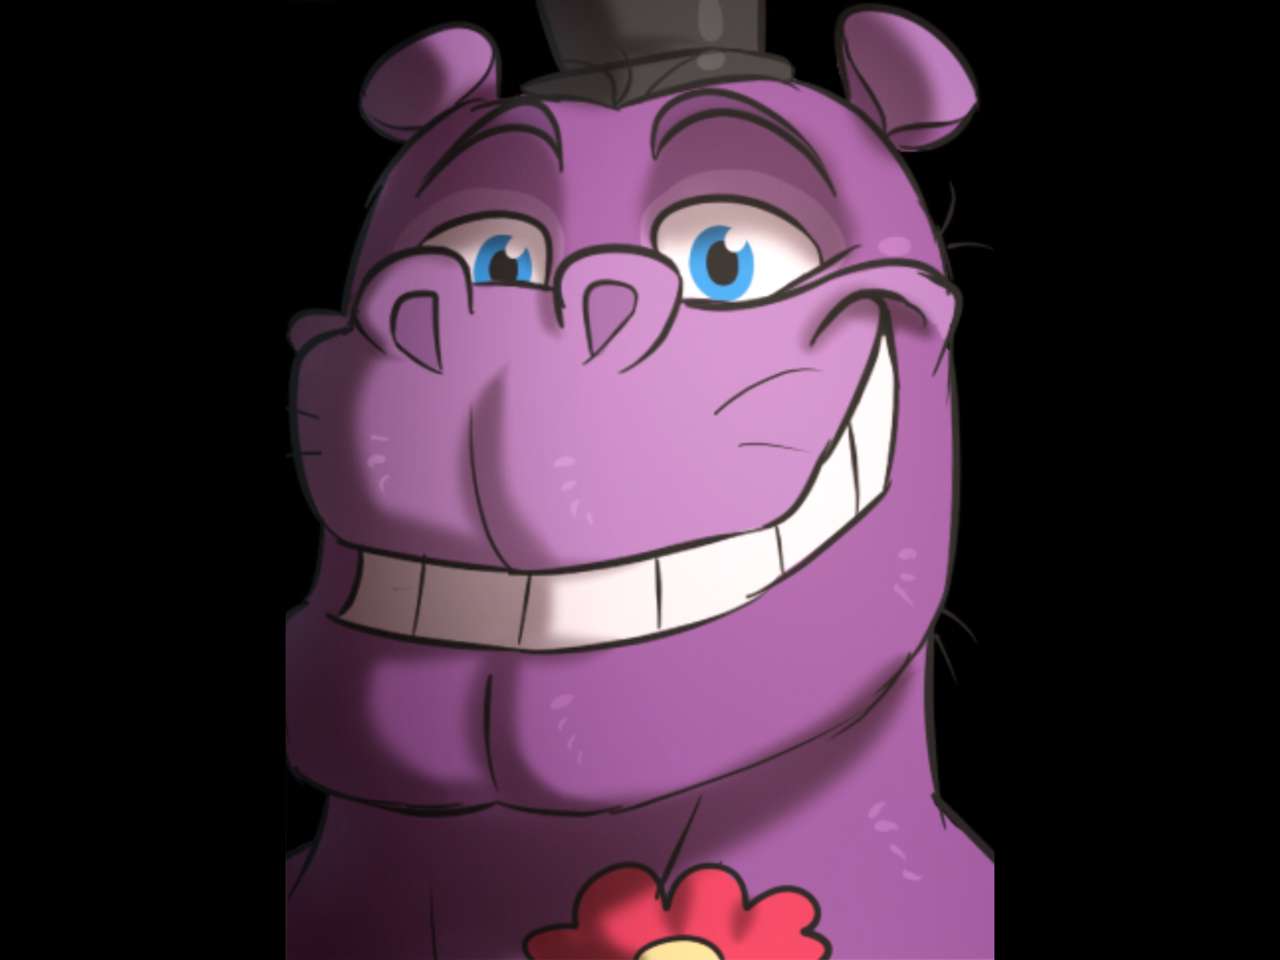 TO FIOLETOWY HIPPO puzzle online